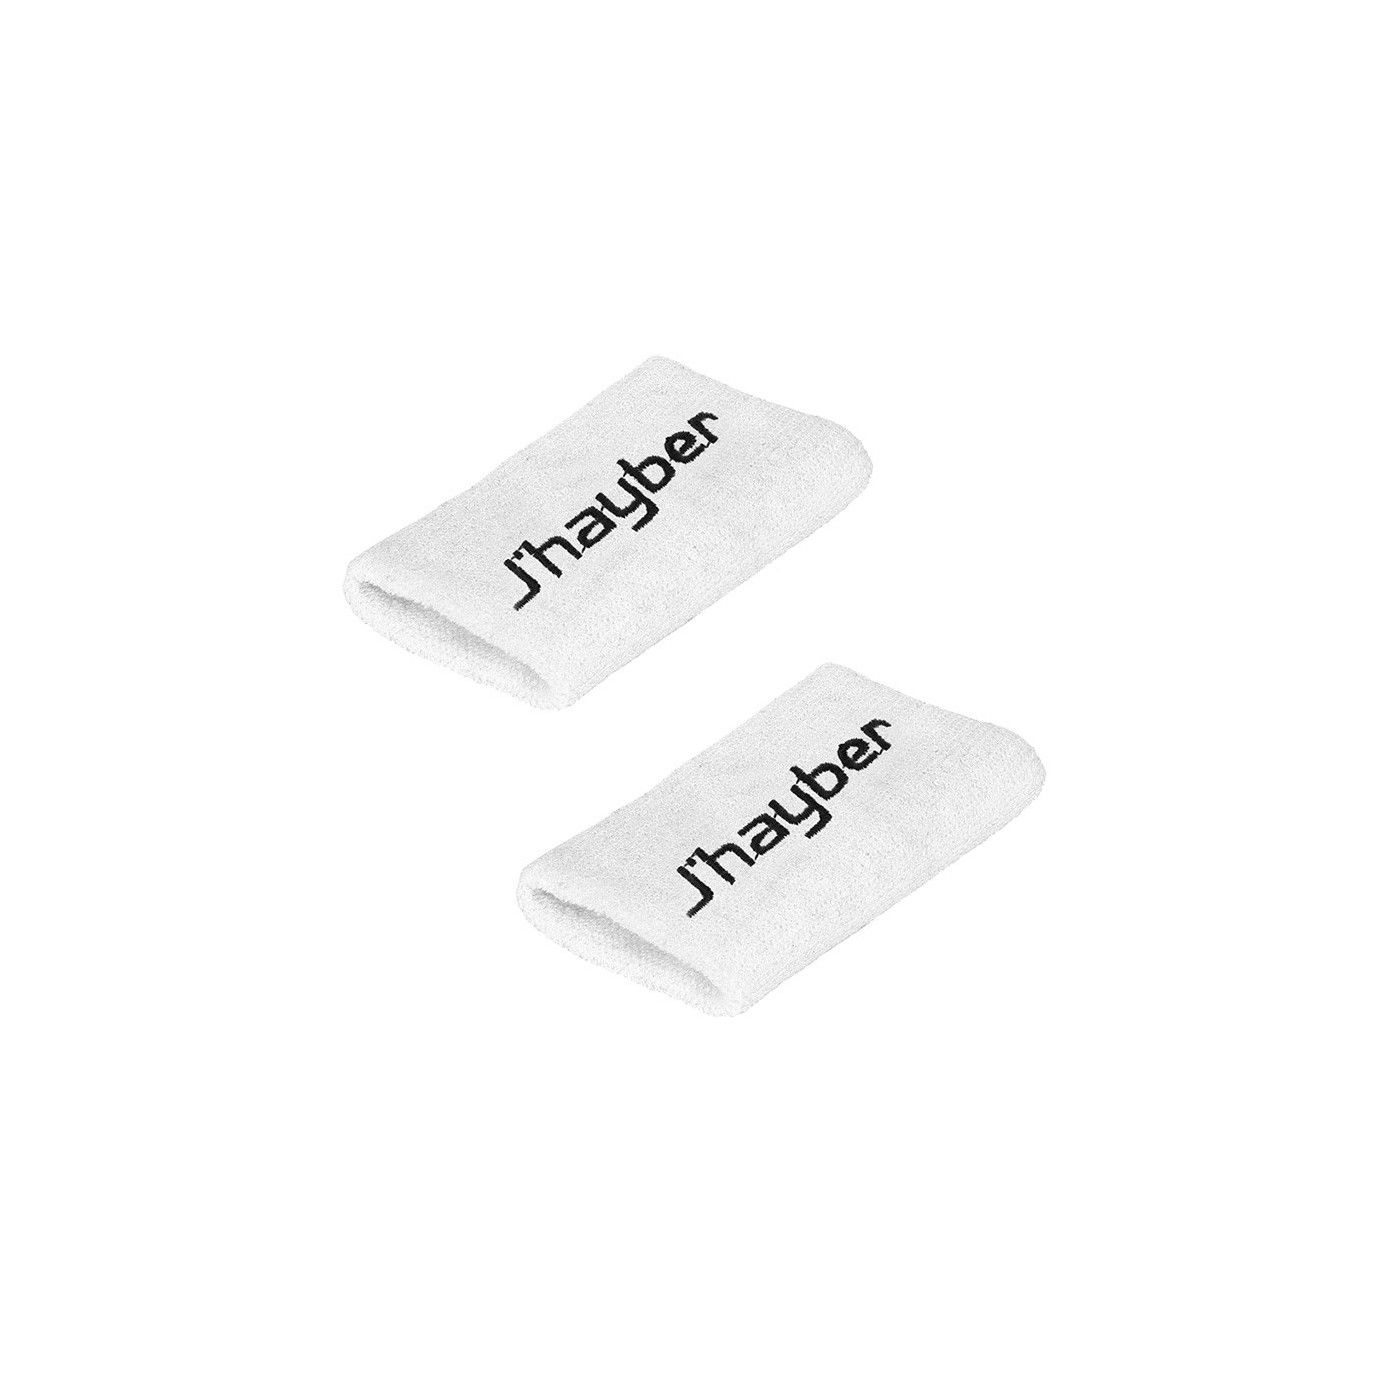 J'hayber Wristbands (2-Pack, White)